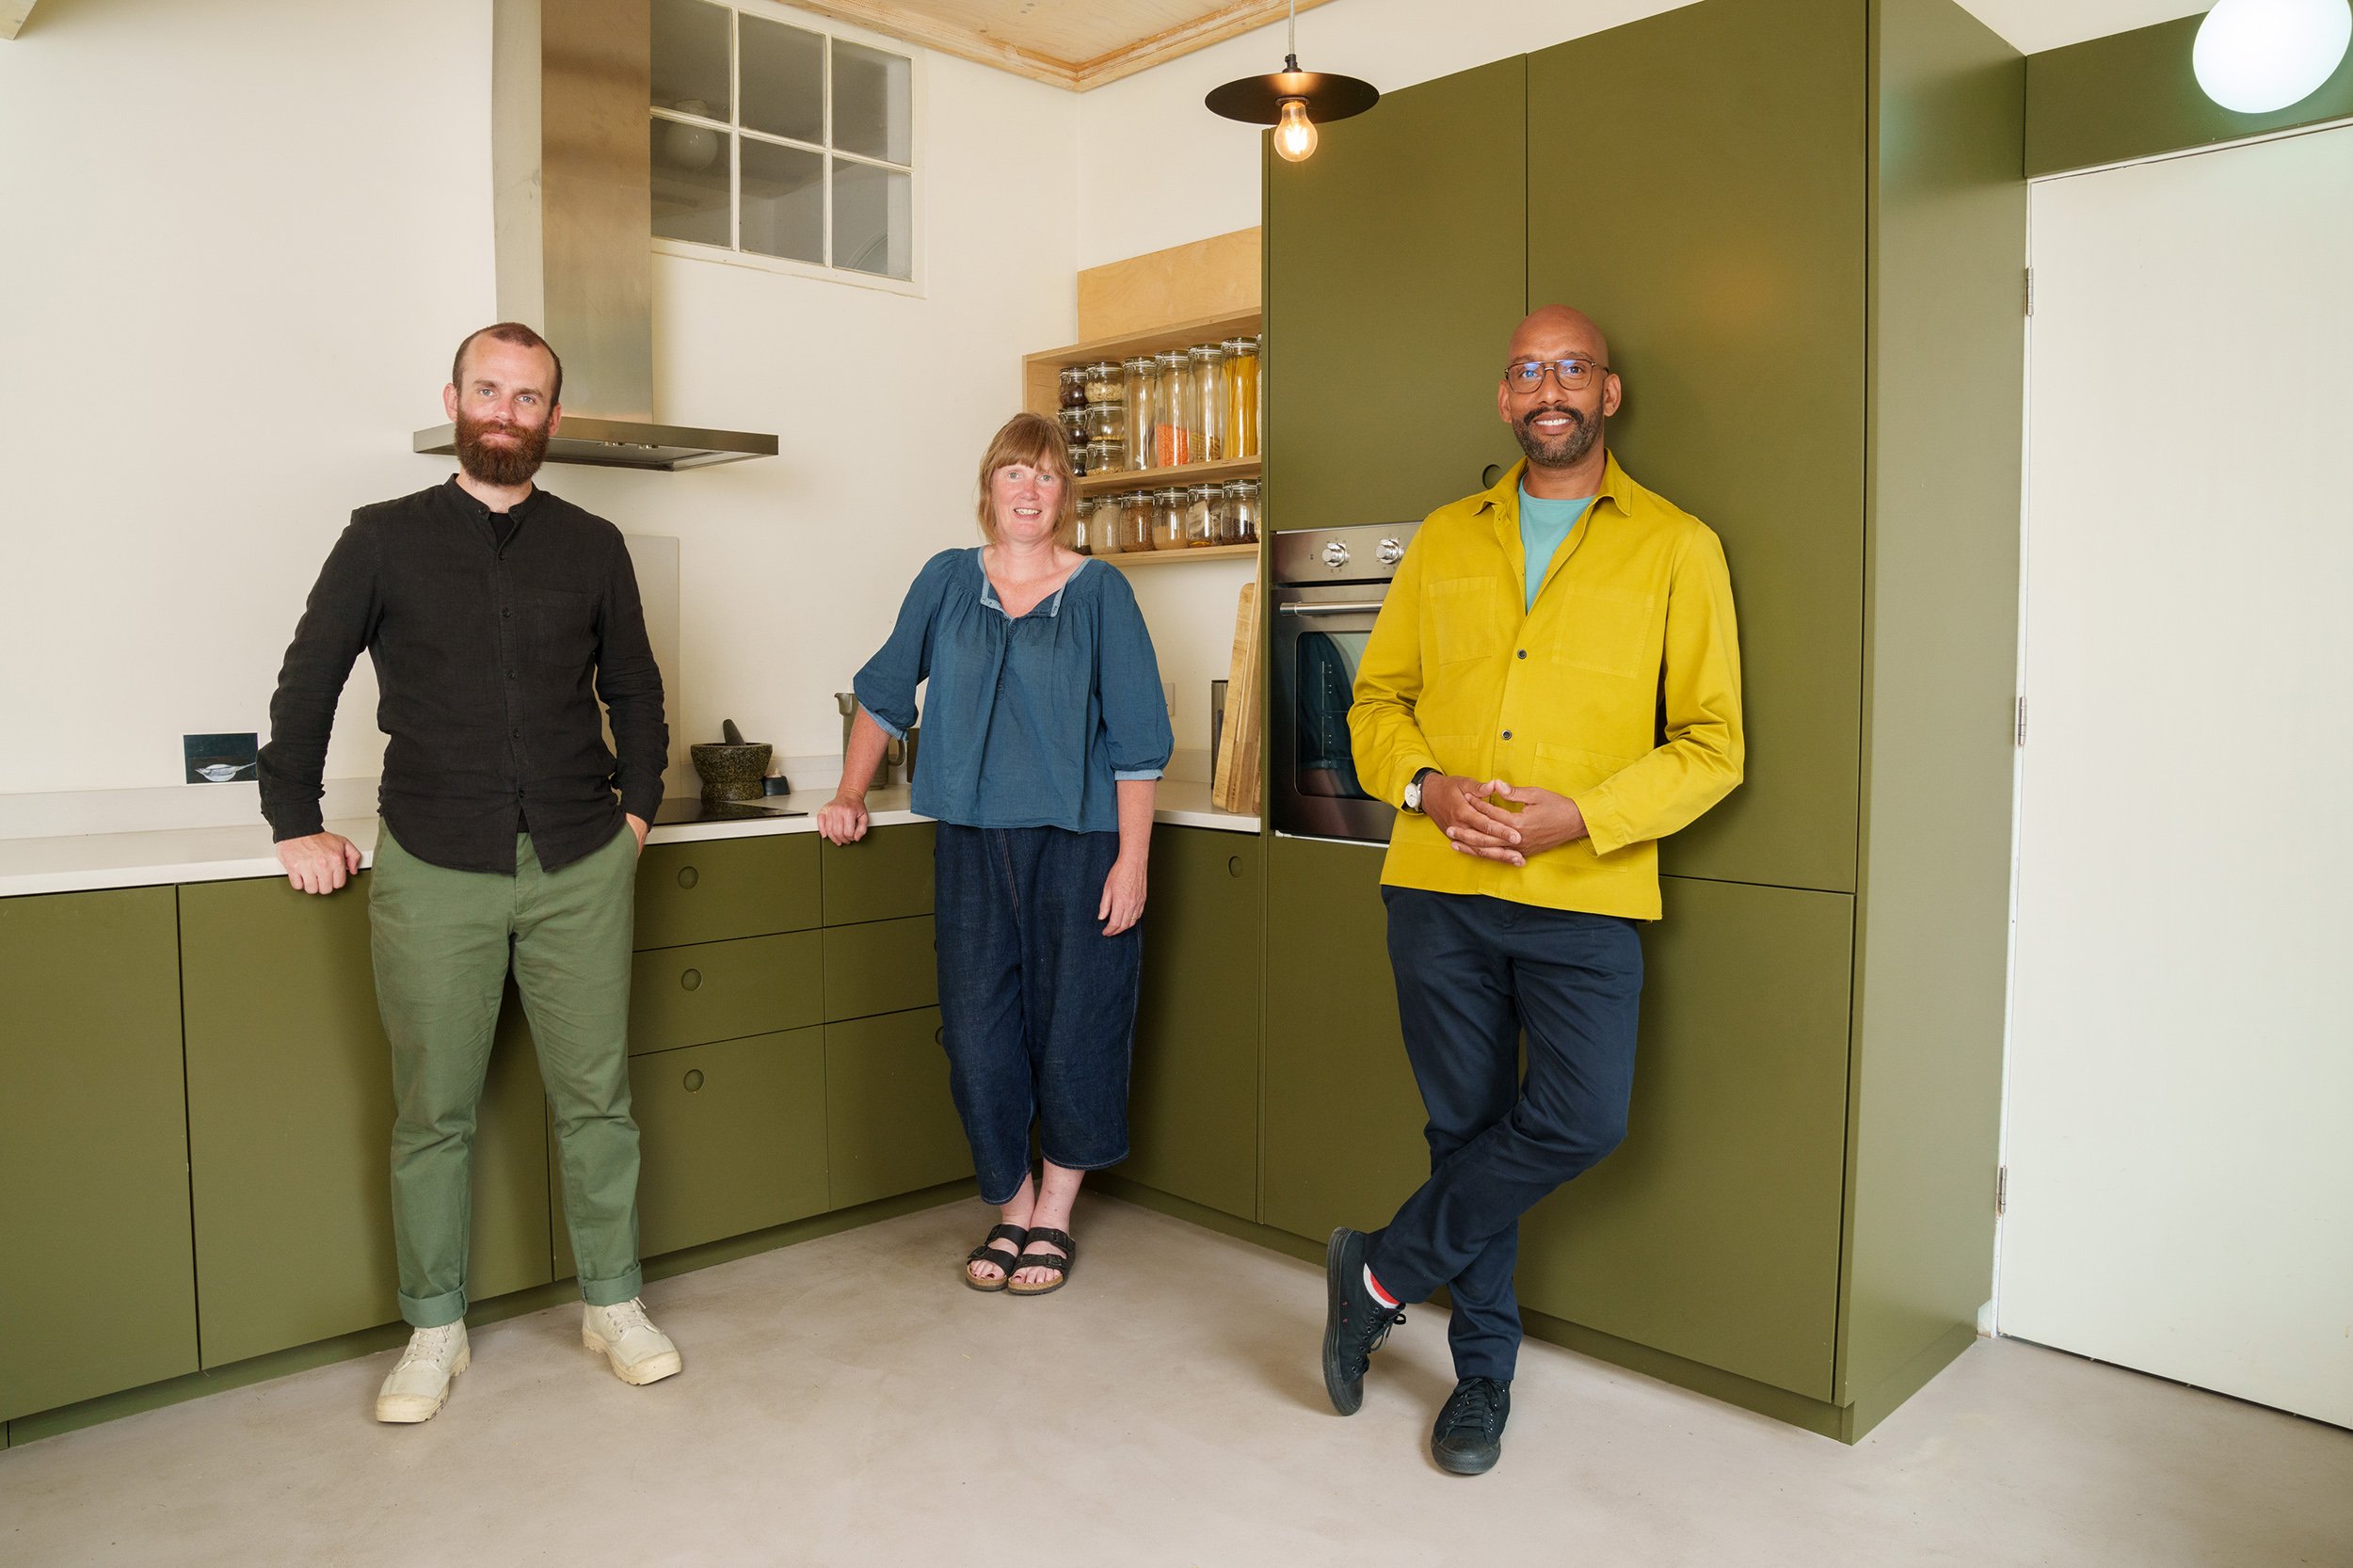  Norwich Garden Studio owners with Damion Burrows  Fremantle UK / Channel 4 